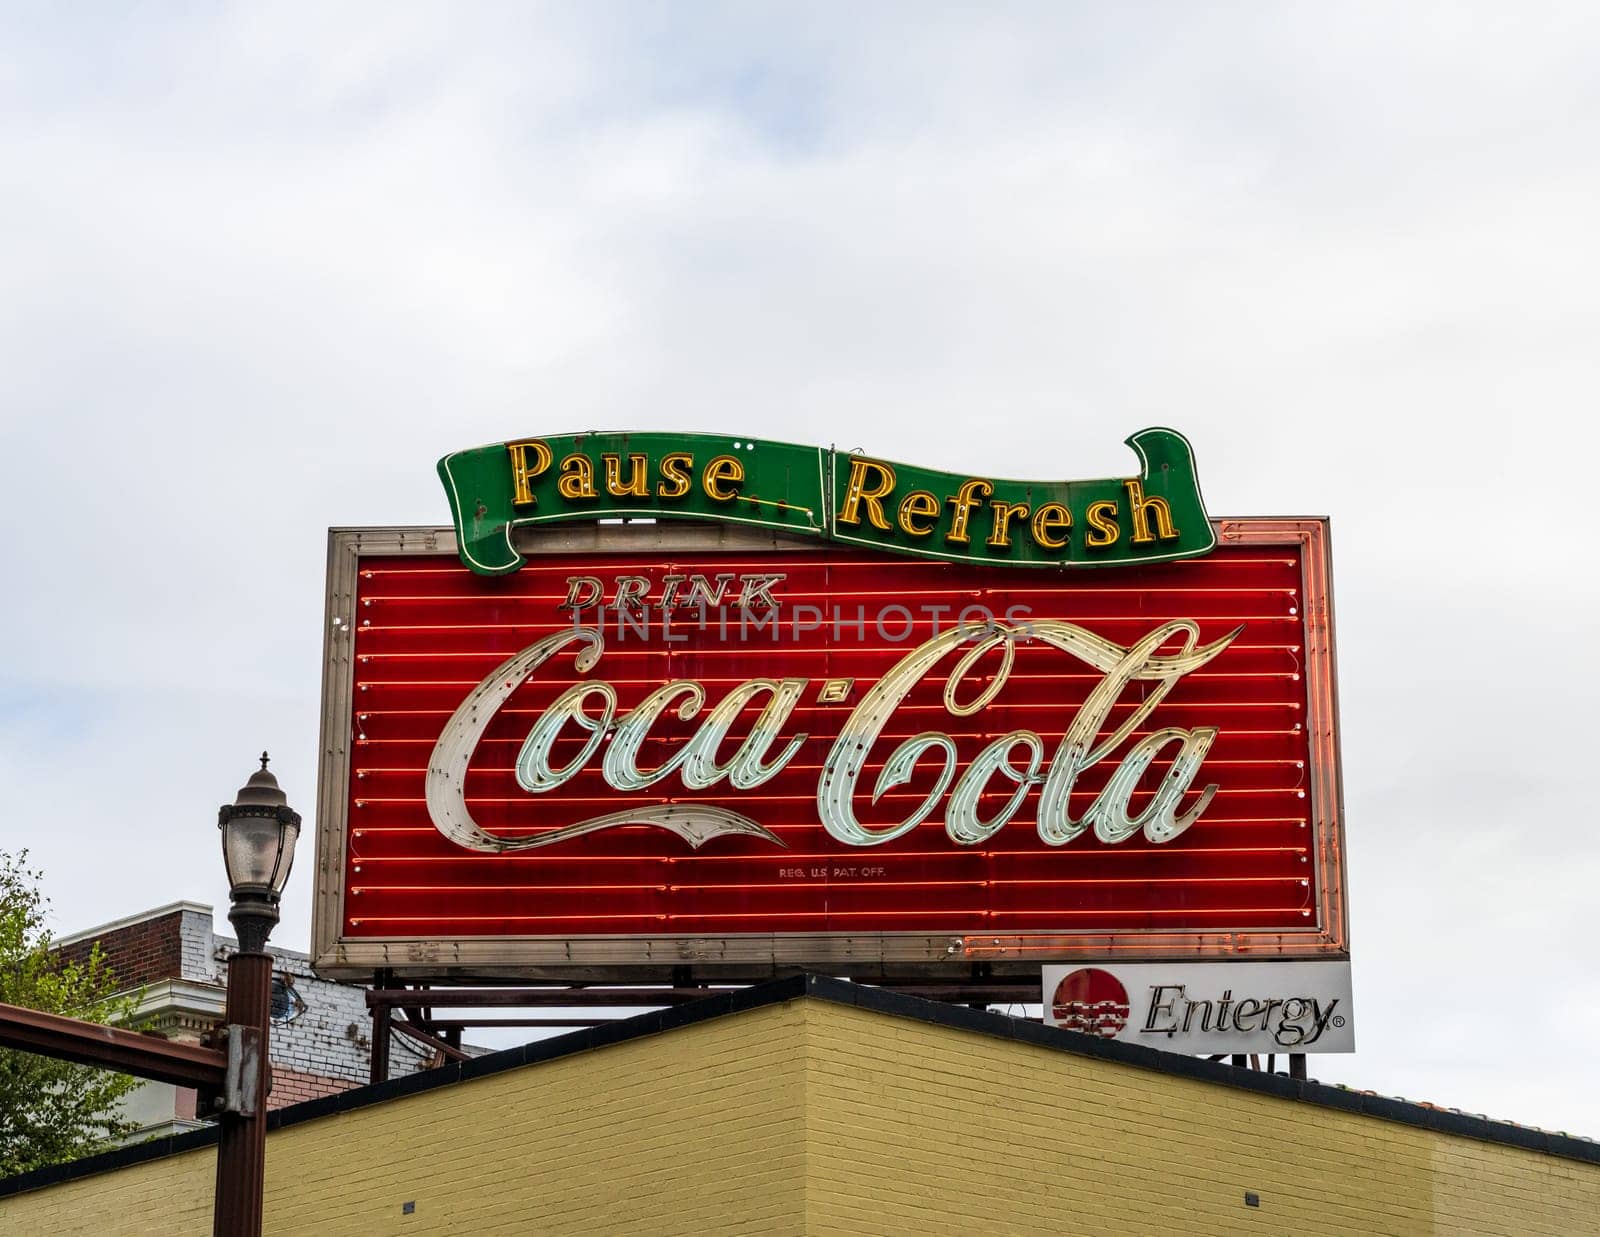 Original design of rooftop Coca Cola sign in Baton Rouge Louisiana by steheap